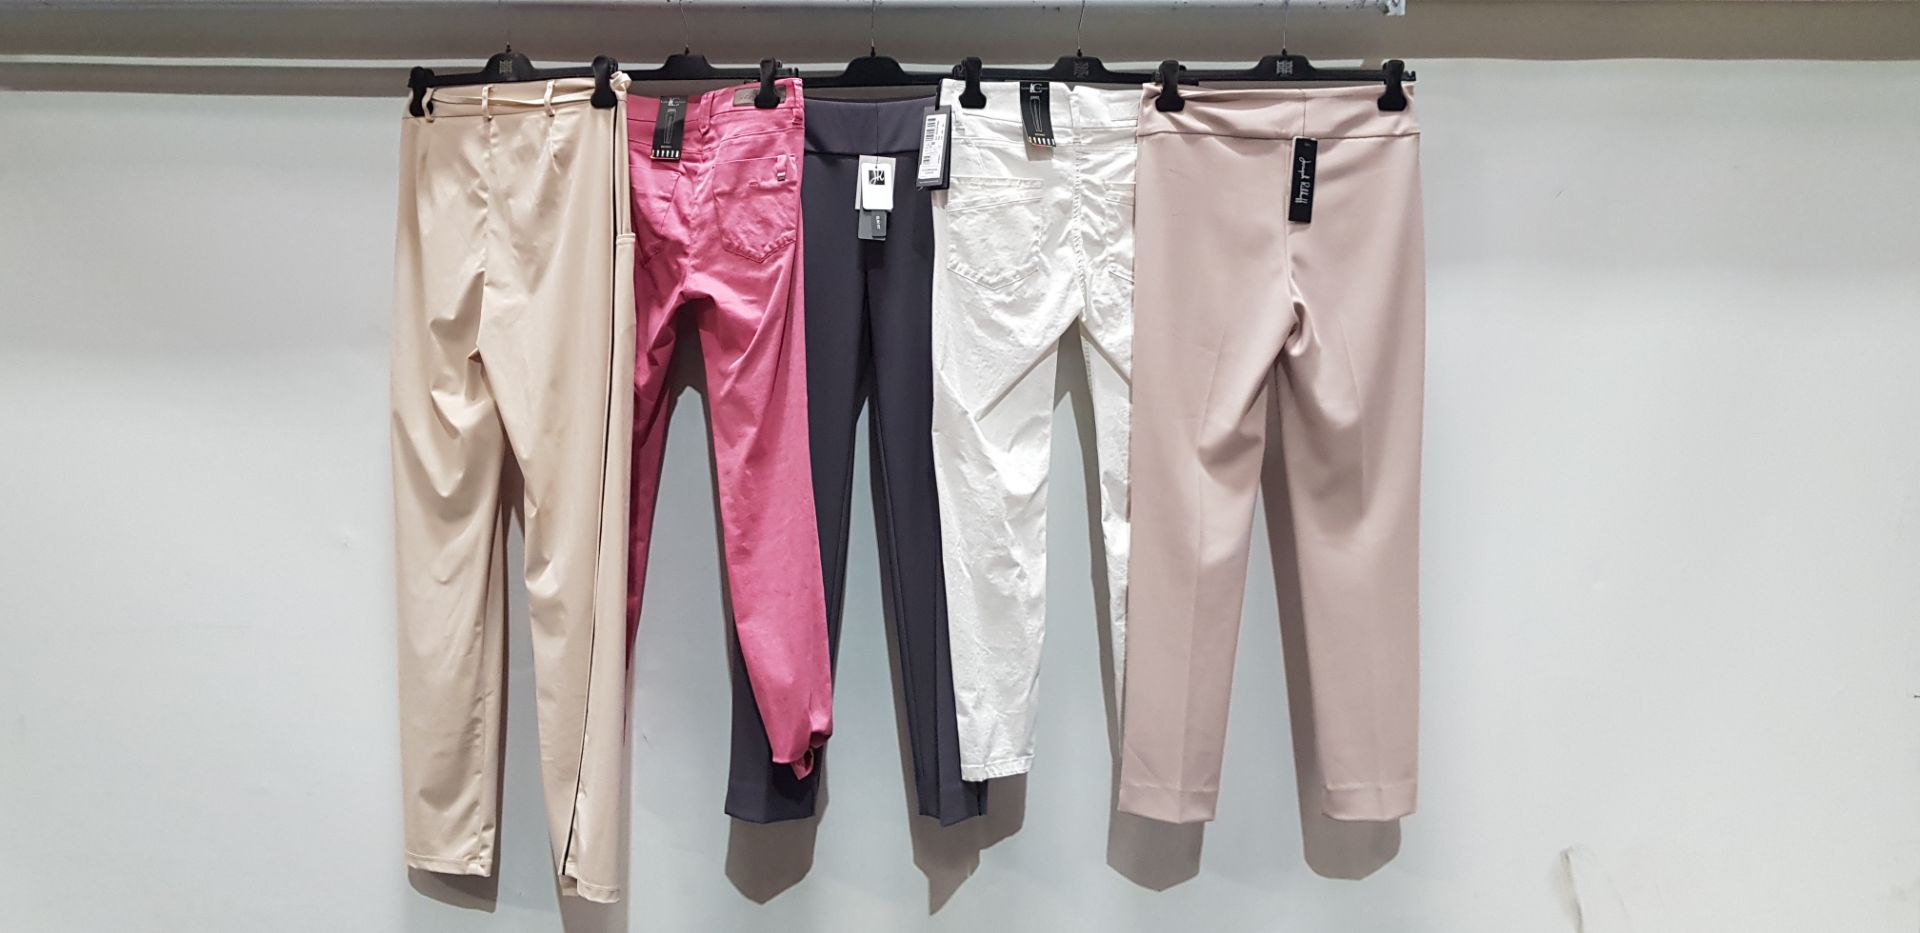 5 PIECE MIXED BRAND NEW PANTS LOT CONTAINING 2 X LUISA CERANO PANTS, 2 X JOSEPH RILKOFF PANTS AND